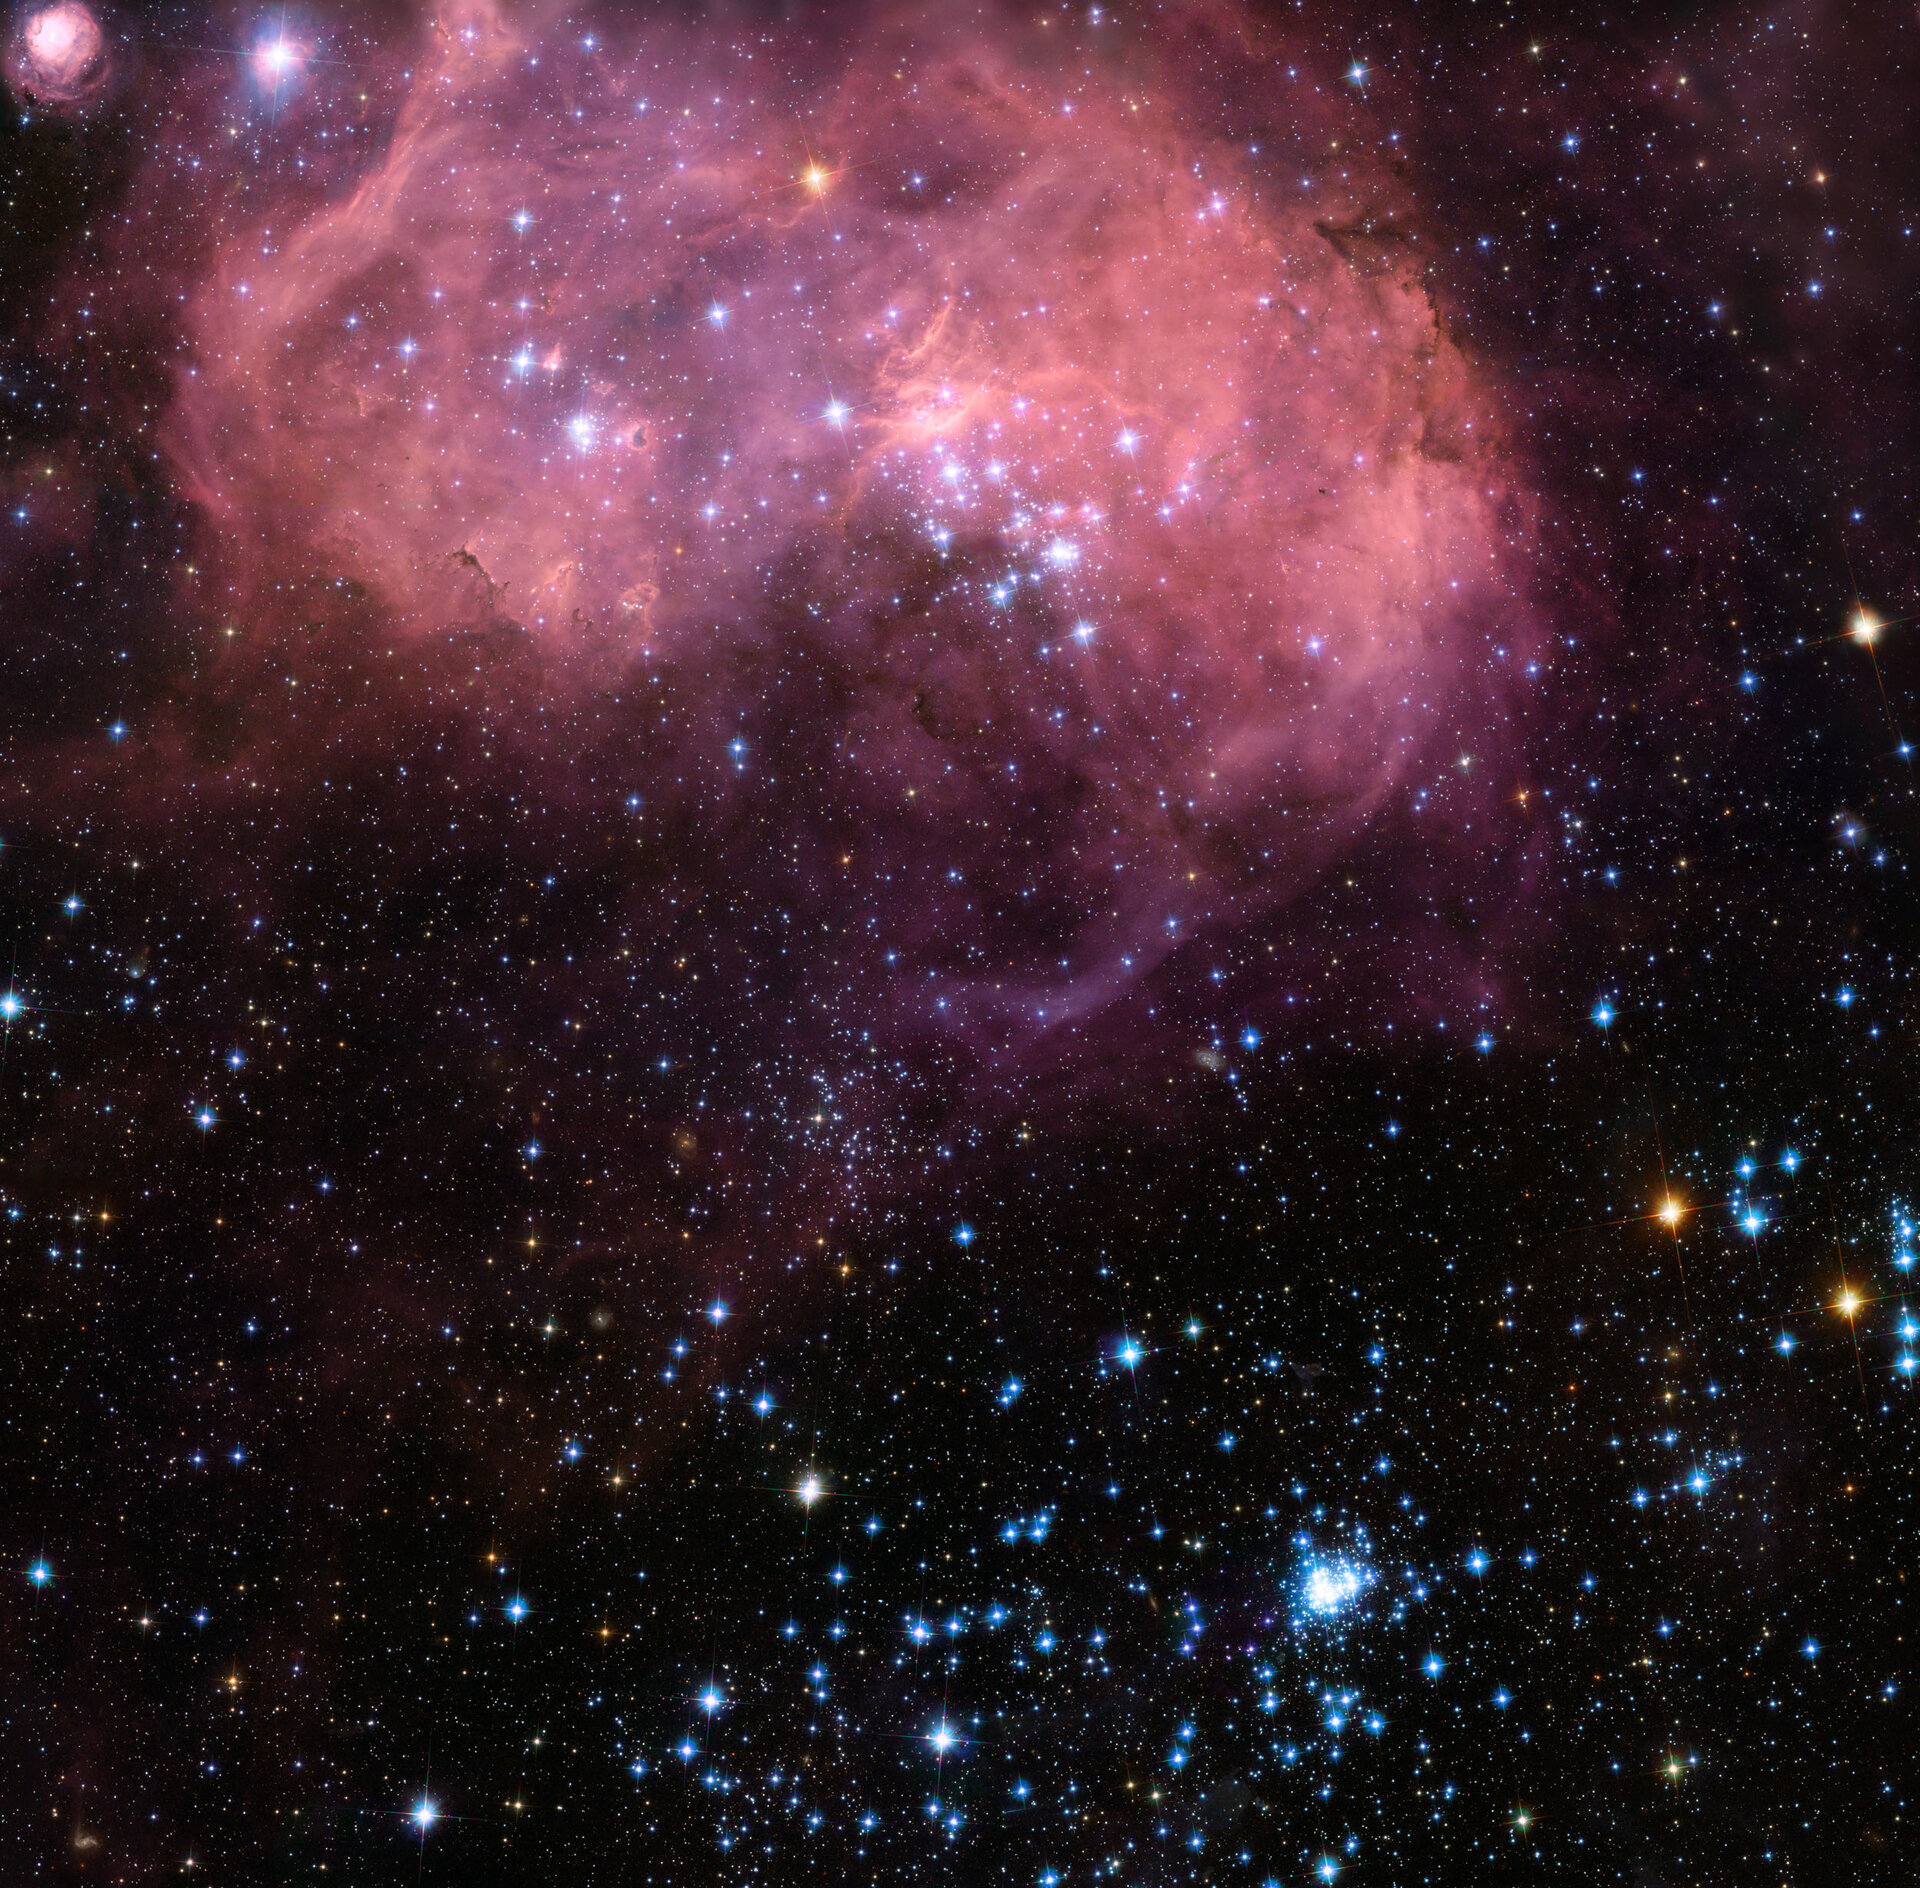 N11 is a vigorously active star formation region